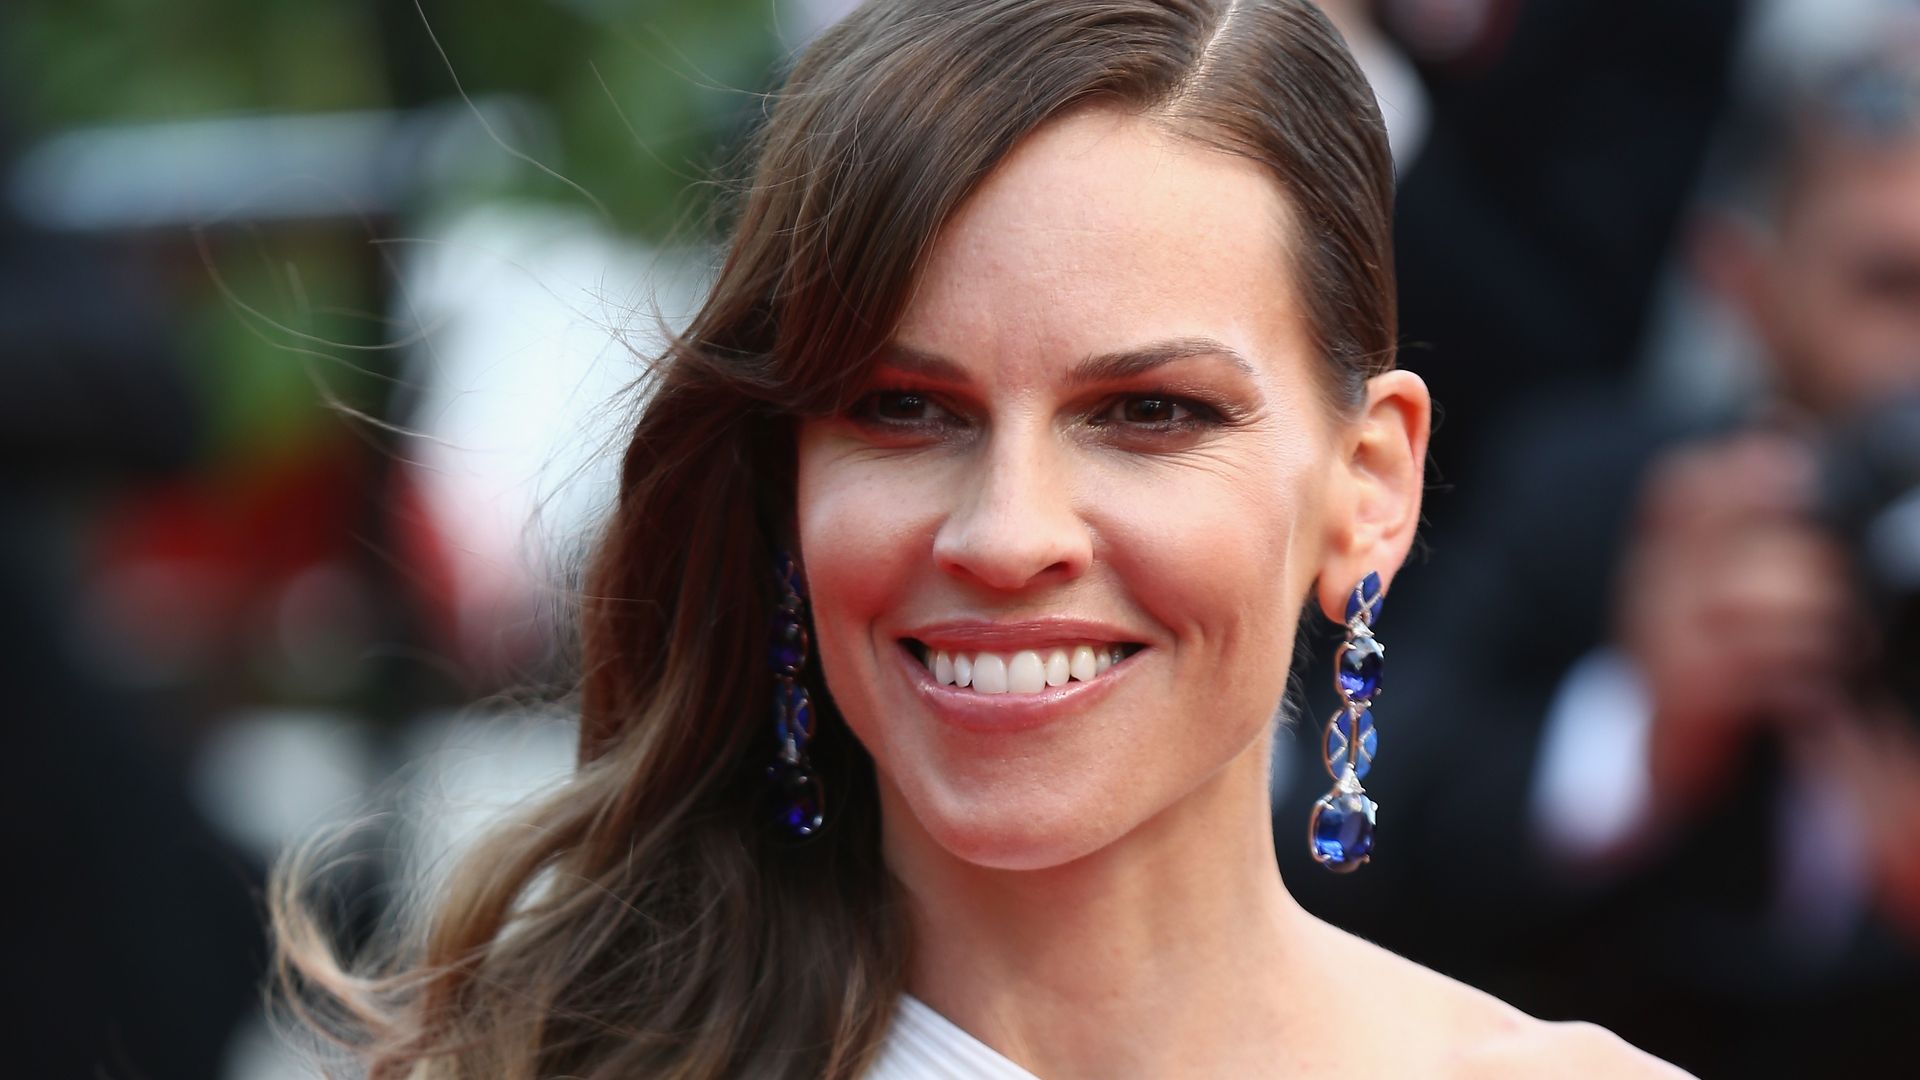 Hilary Swank in a one-shouldered gown and blue earrings smiling in an outdoor setting